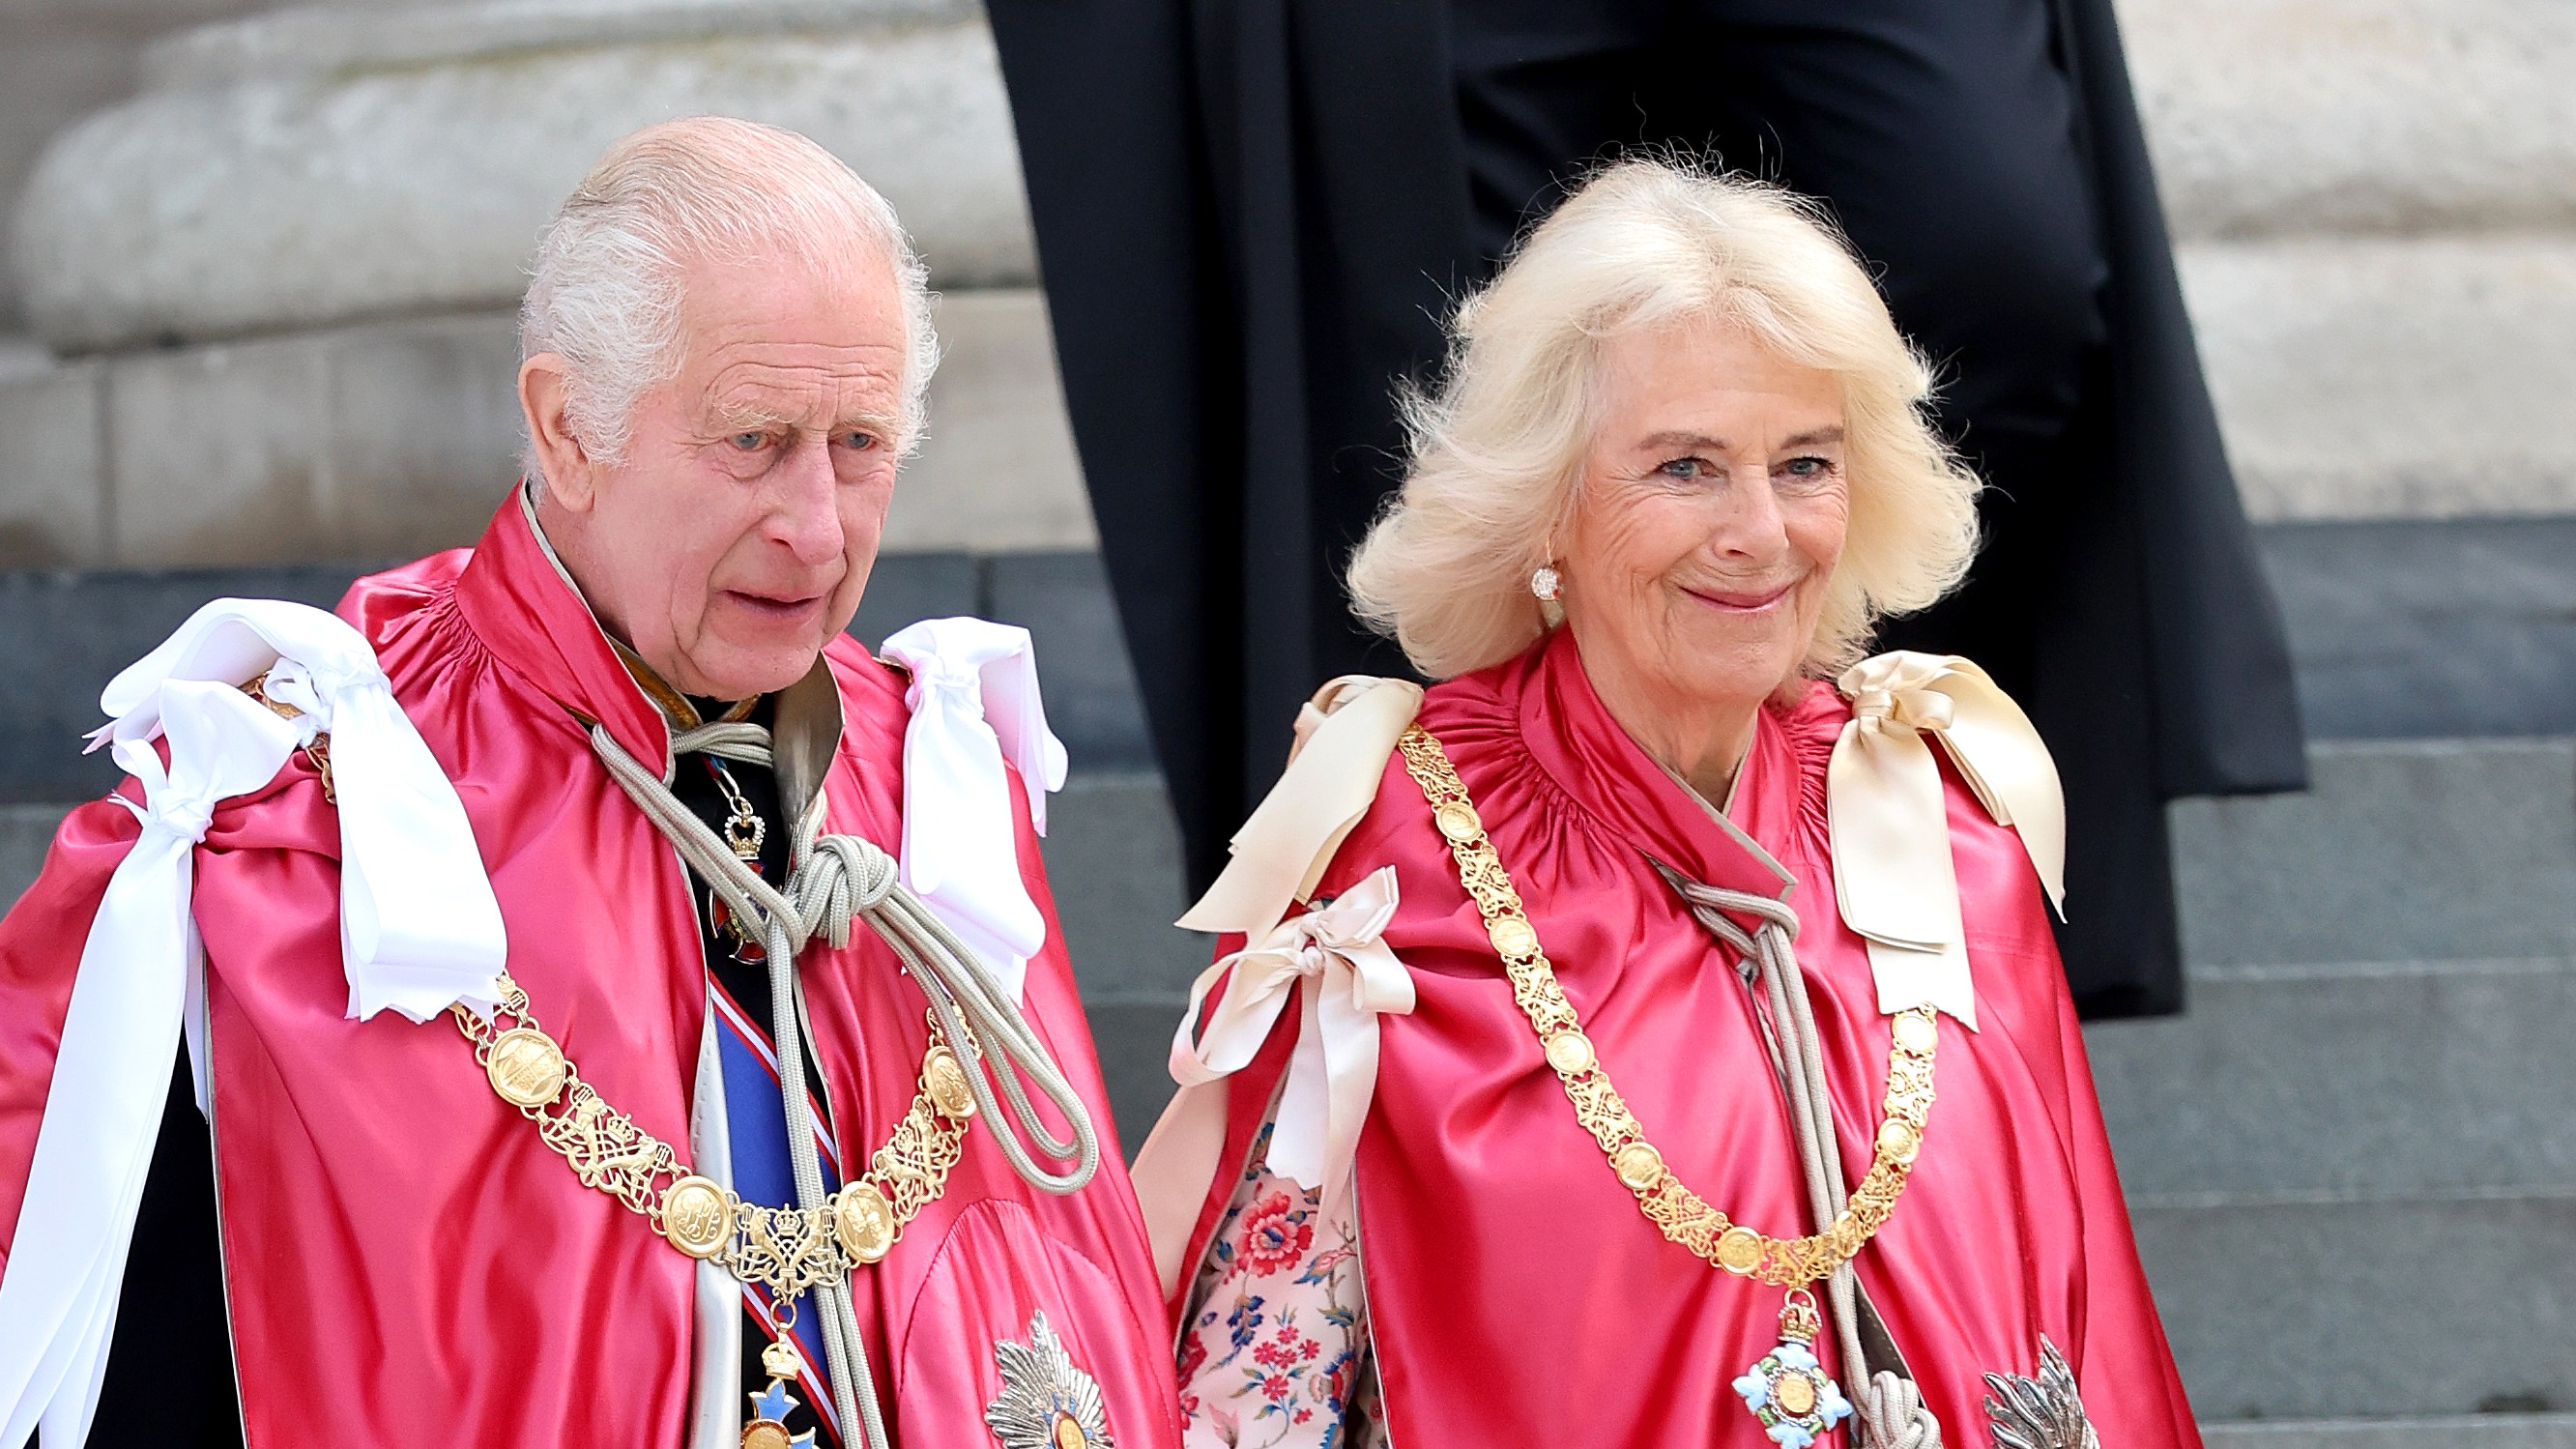 The King has had a busy schedule this week, including a service at St Paul’s Cathedral that he attended with the Queen